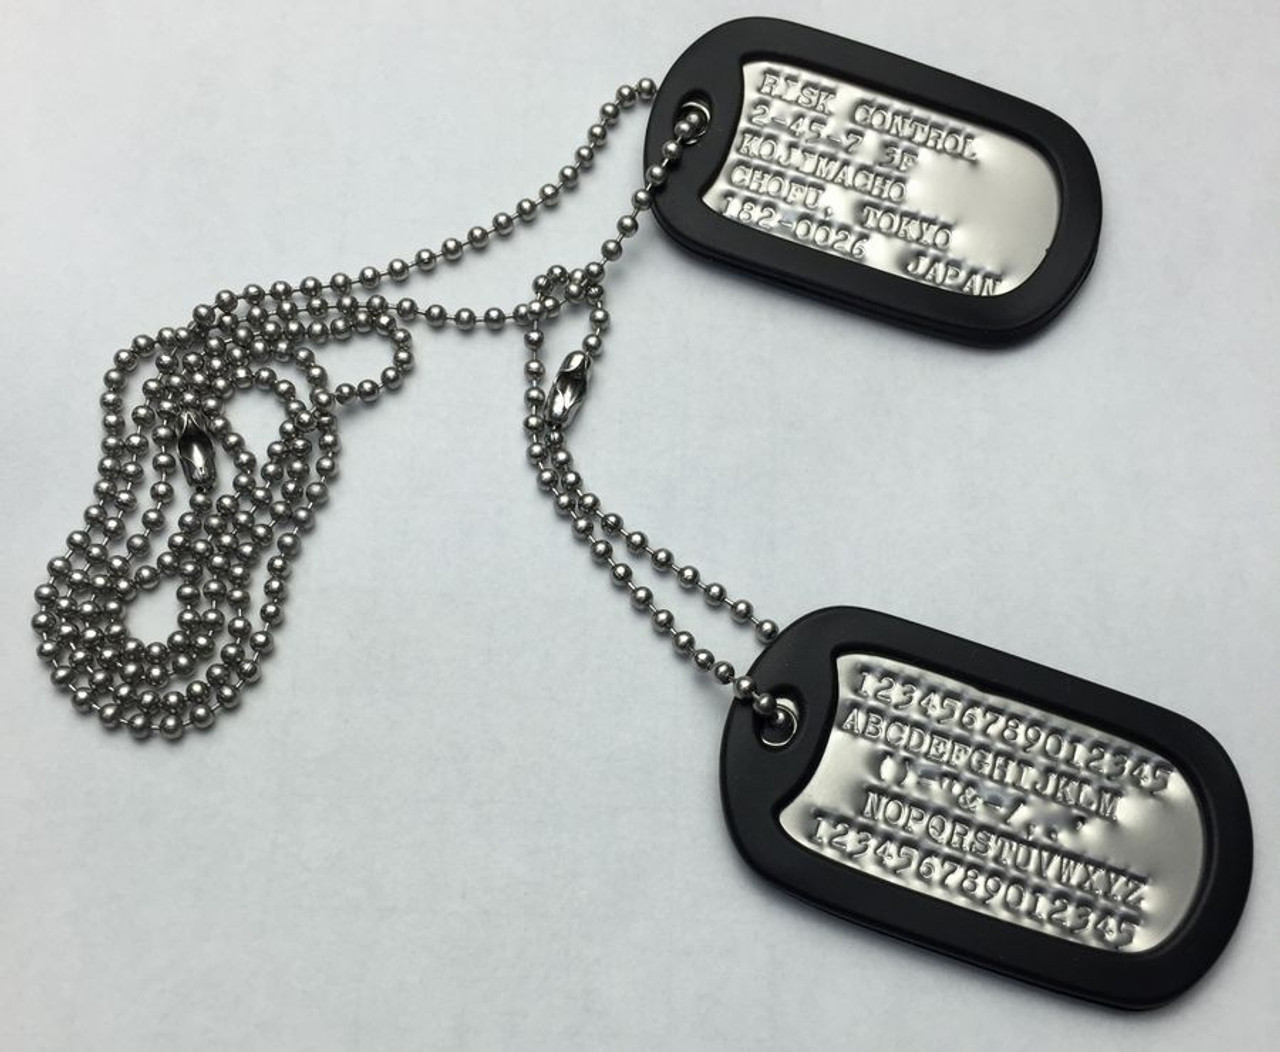 can you wear your dog tags in civilian clothes